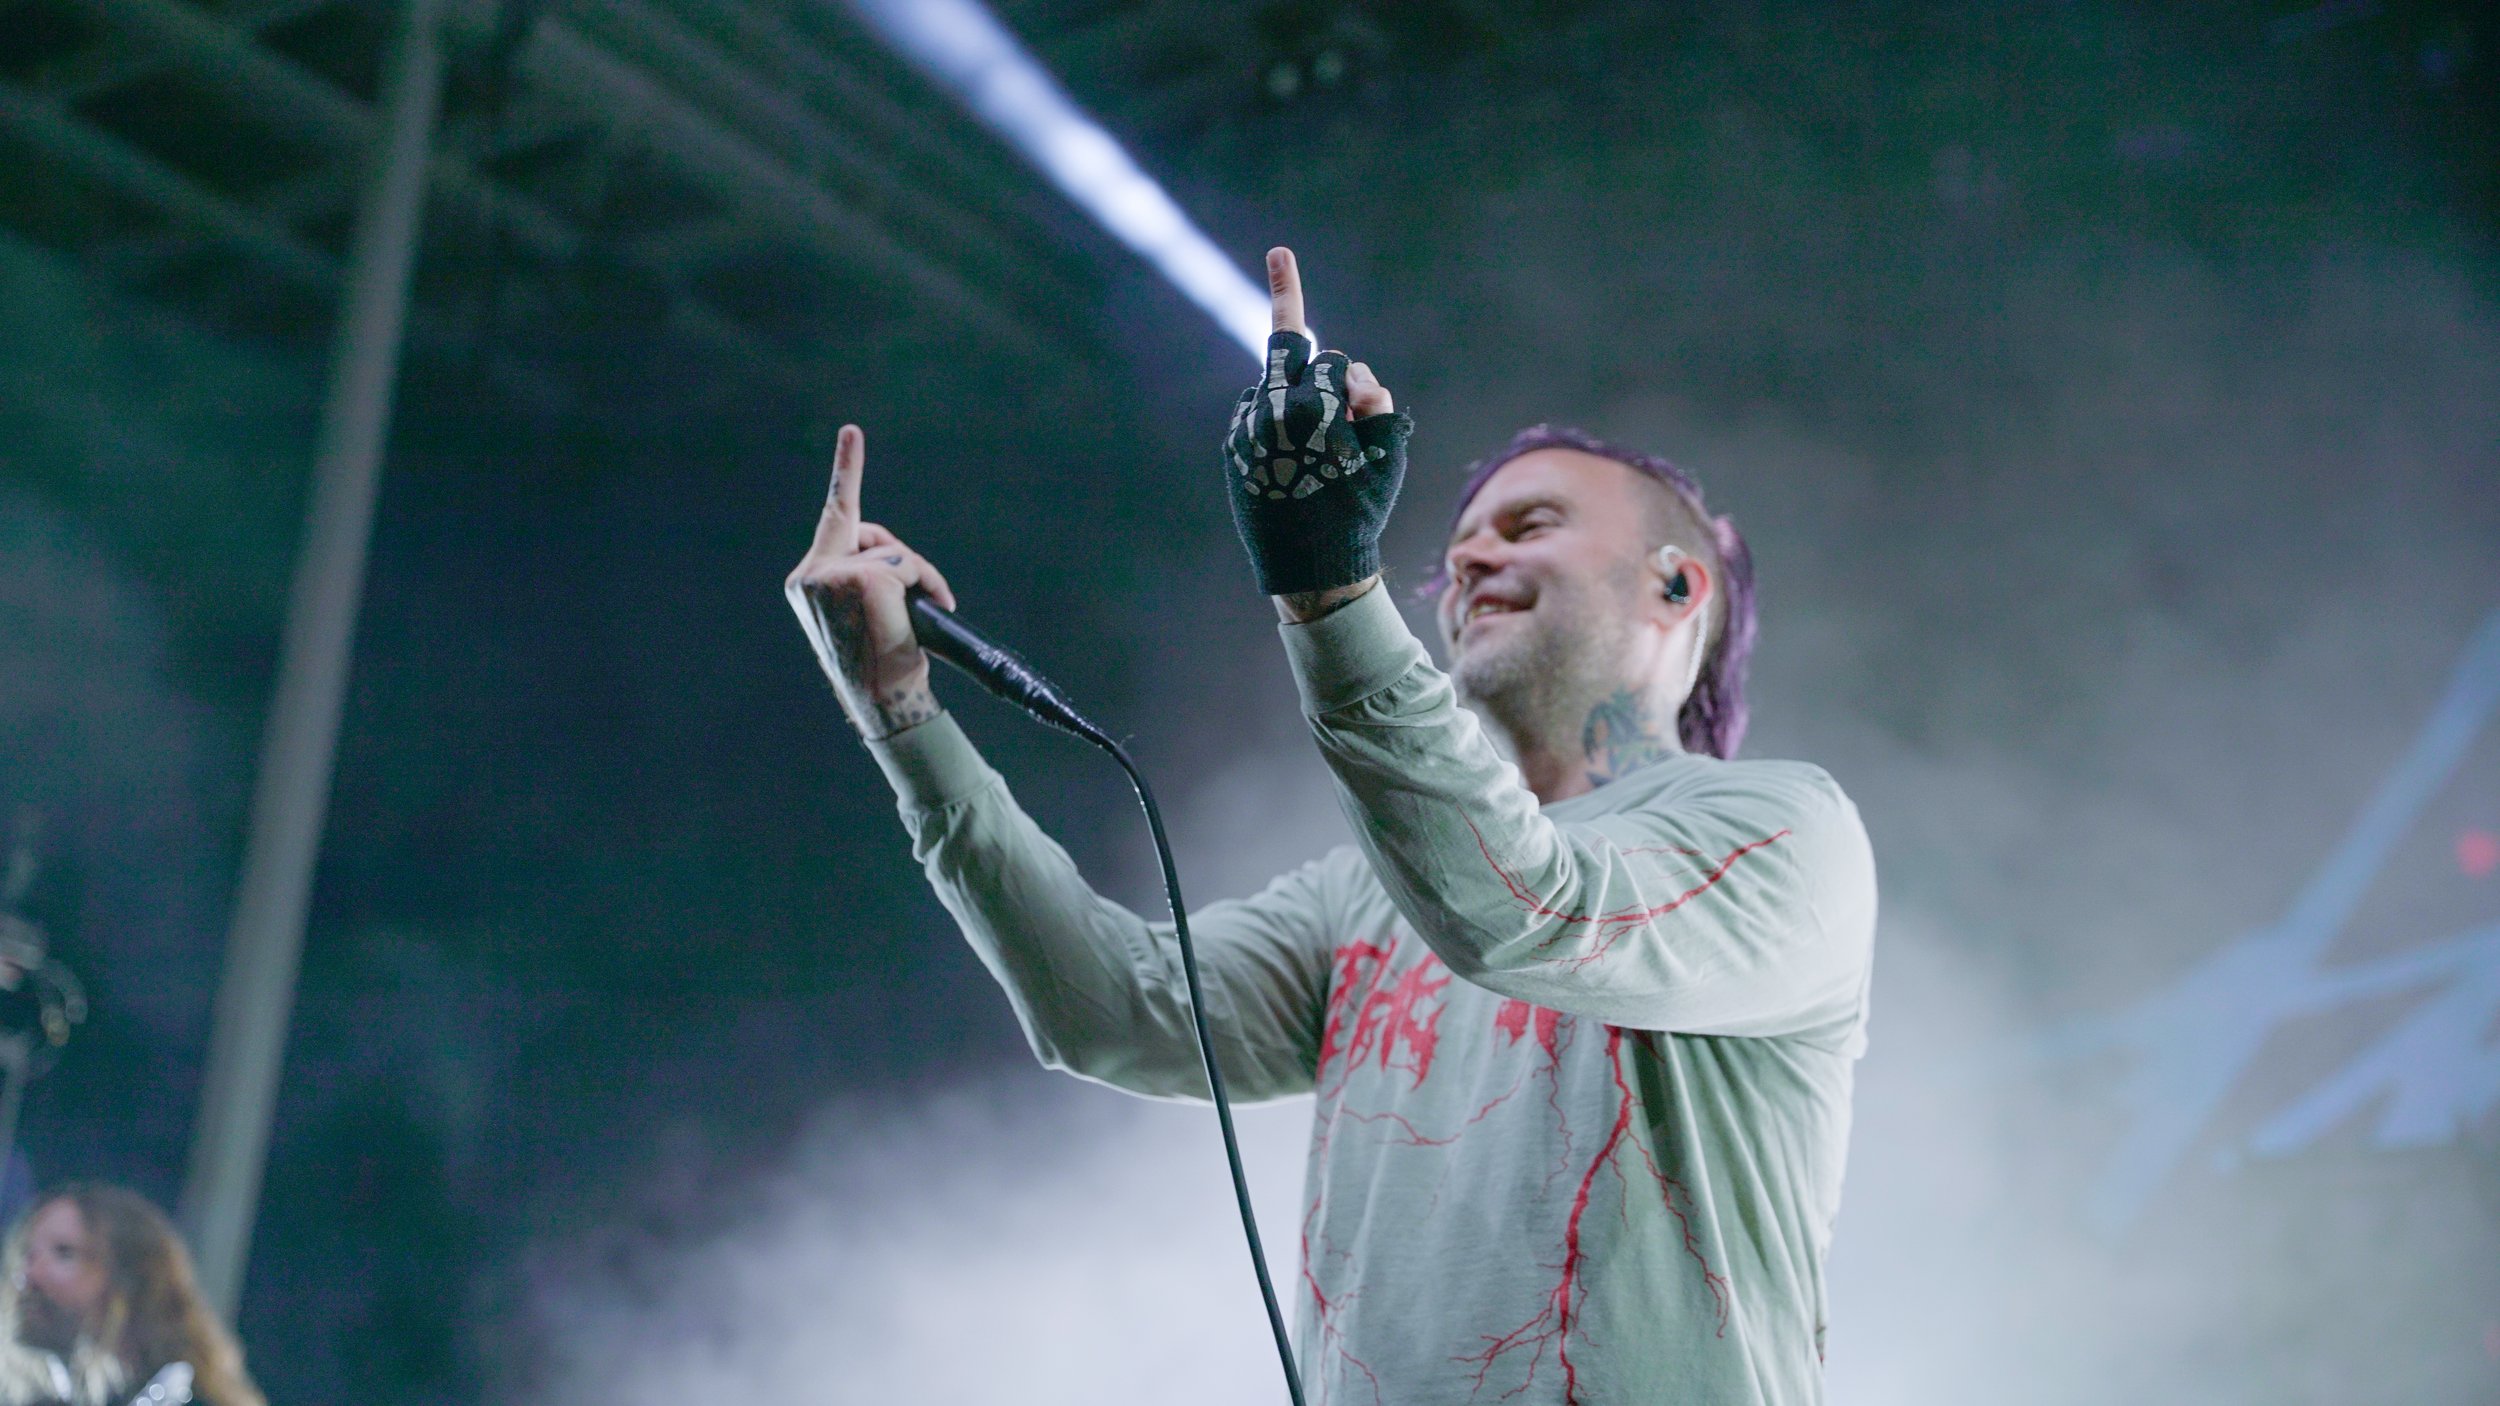  Frontman Bert McCracken takes a moment to get as close as he can to the audience and presents them a double middle finger, all with a smile on his face. 